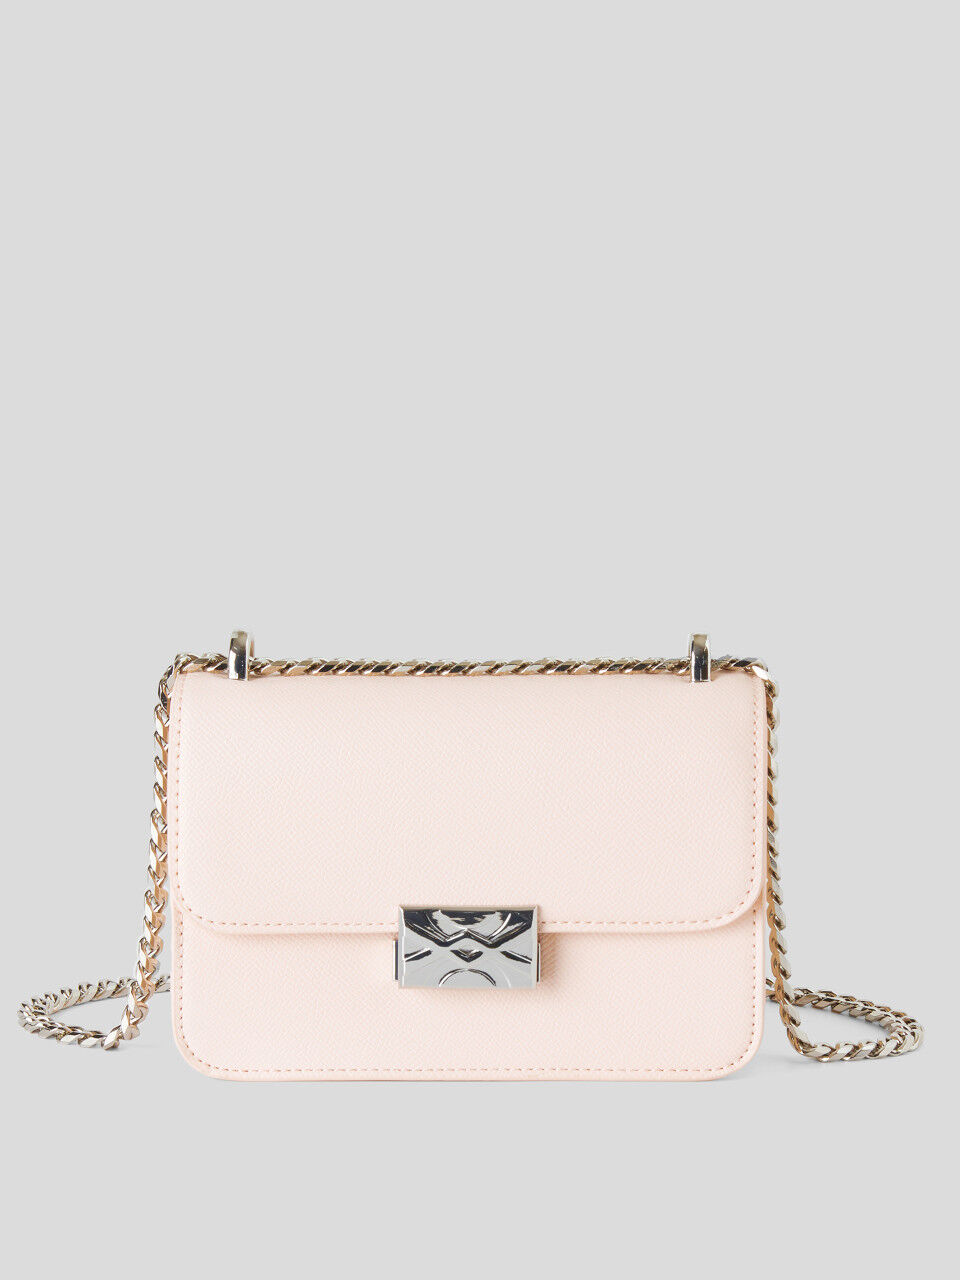 Small pink Be Bag